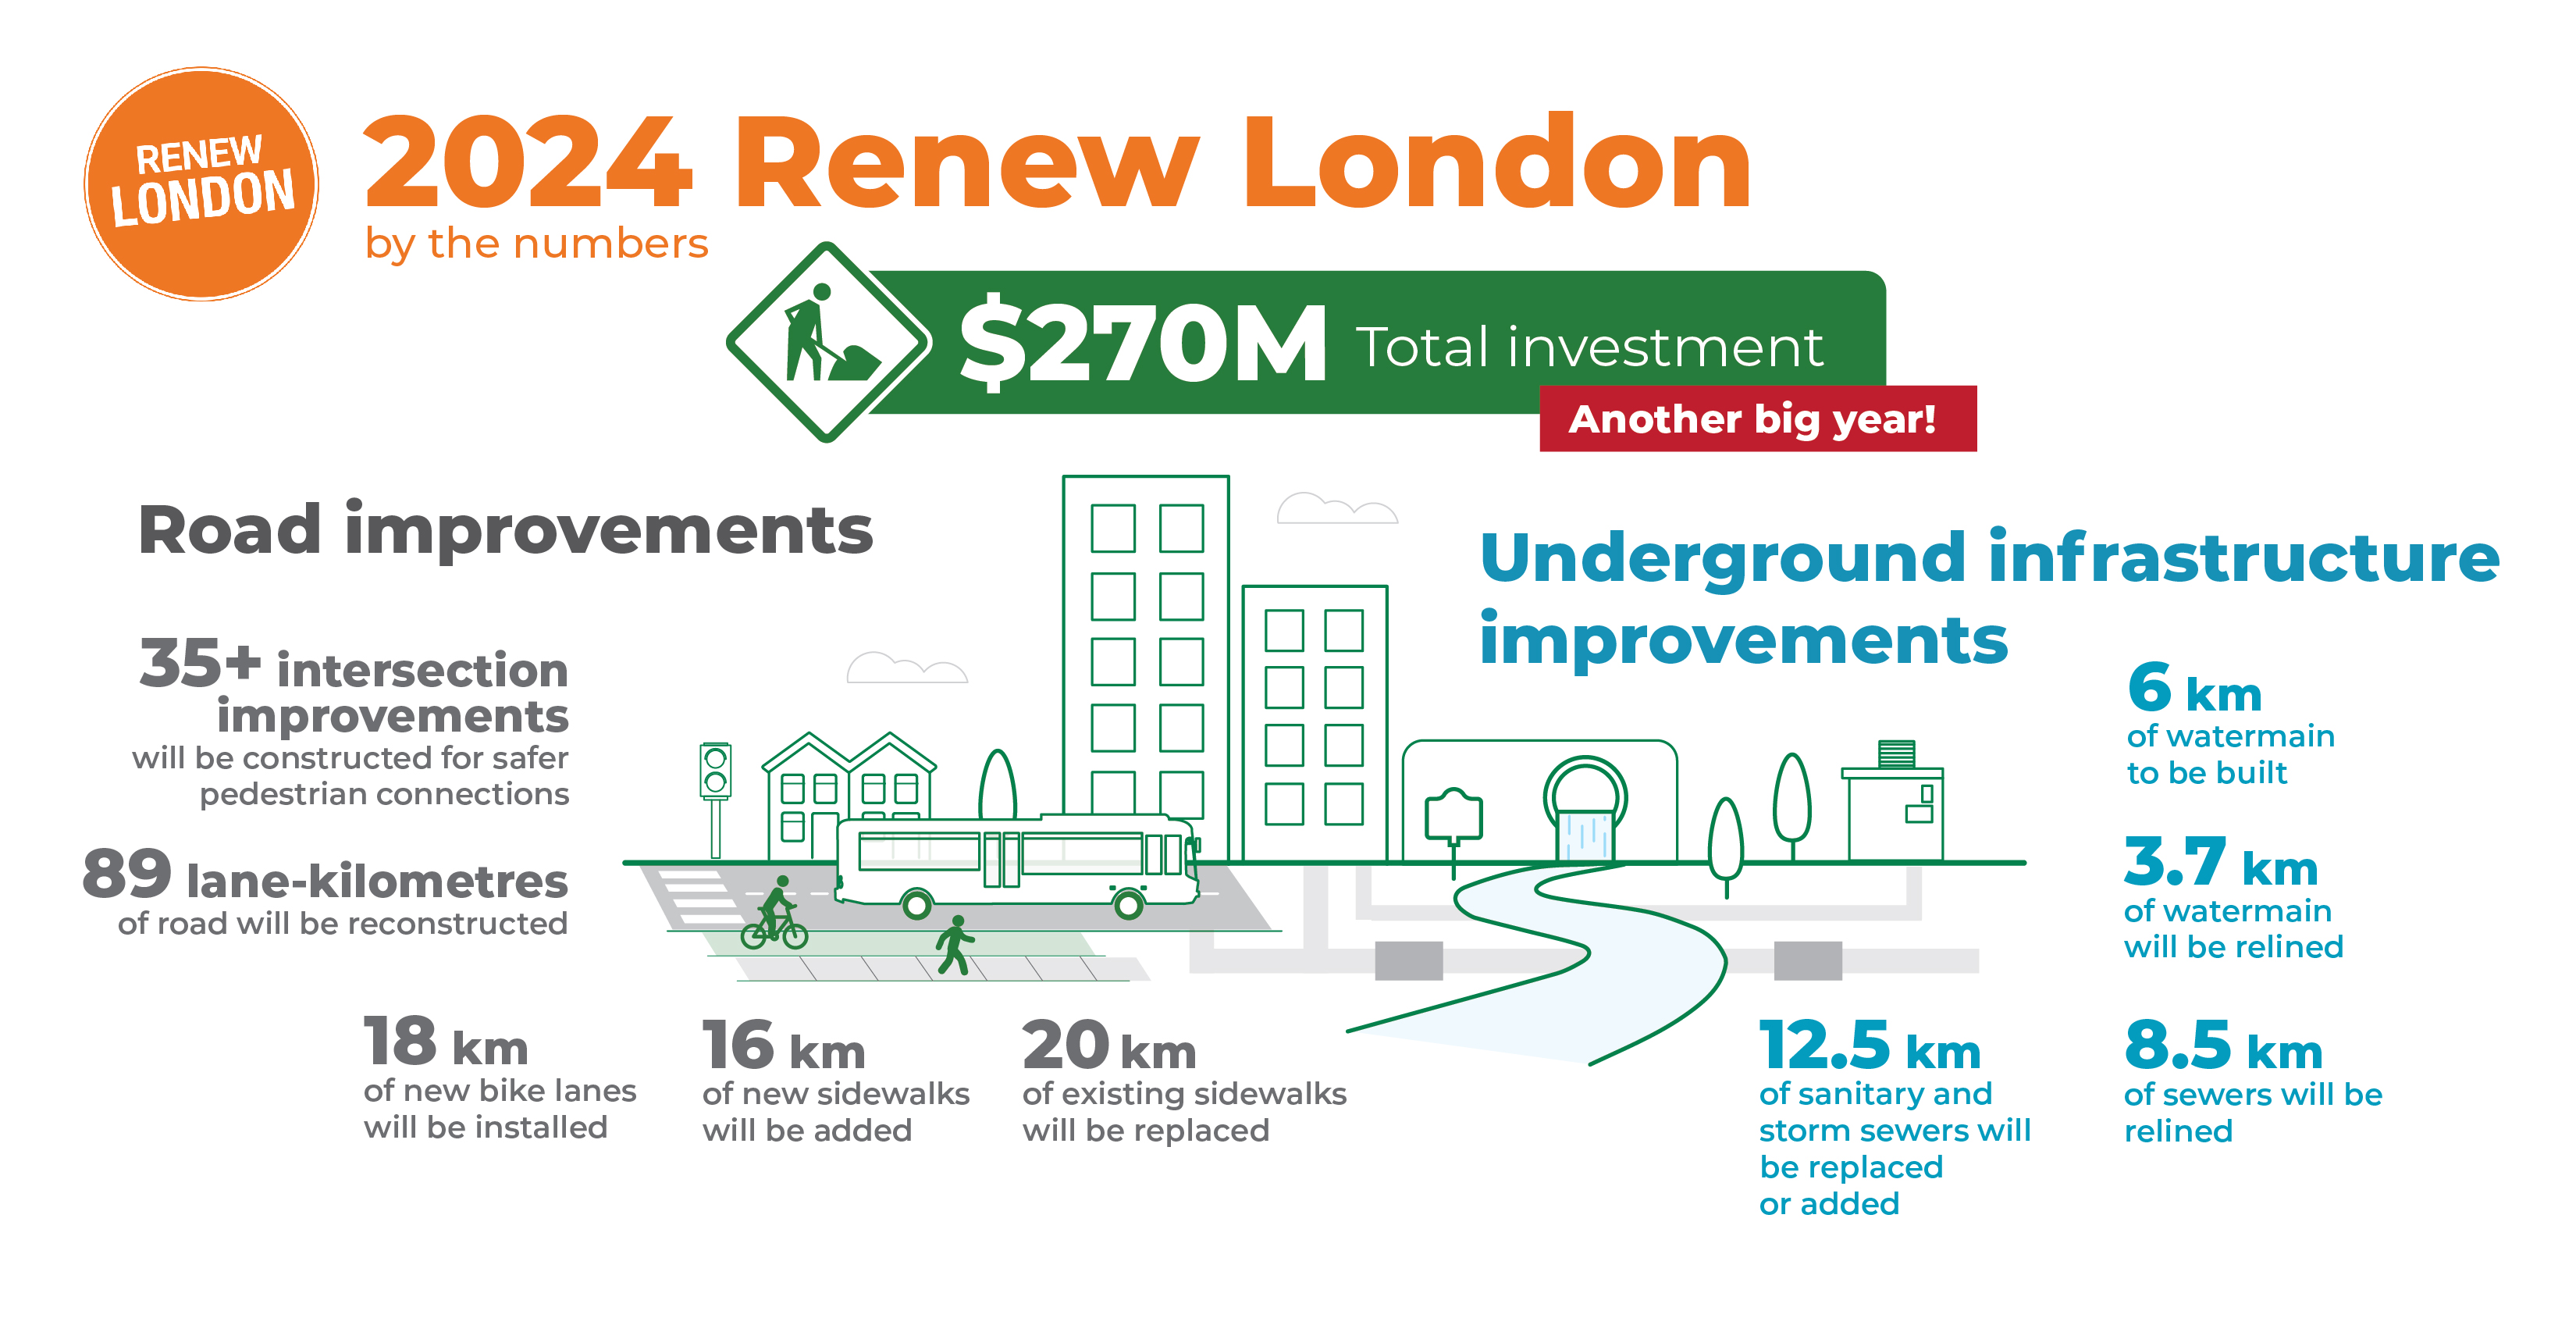 An illustration of the Renew Program investments in 2024